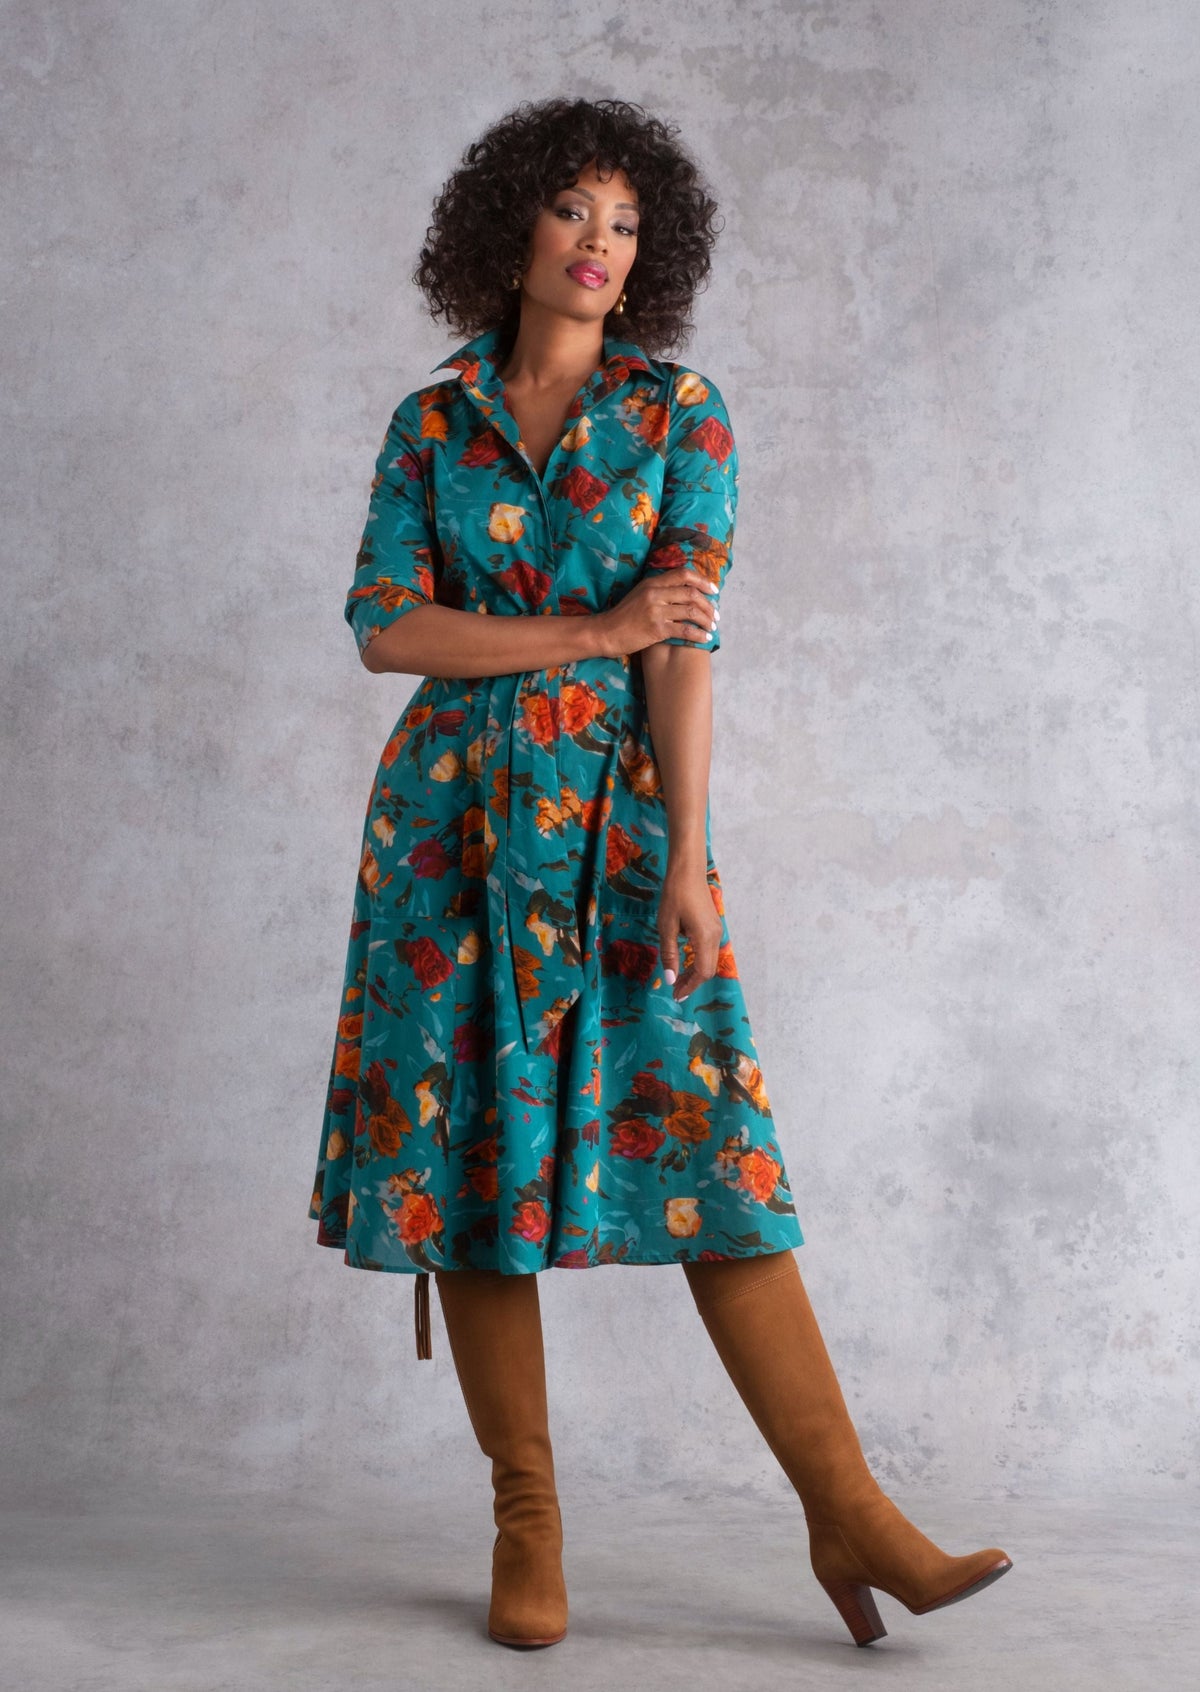 For The Love of Pockets Dress made with Liberty Aphrodite's Rose Aqua Tana Lawn™